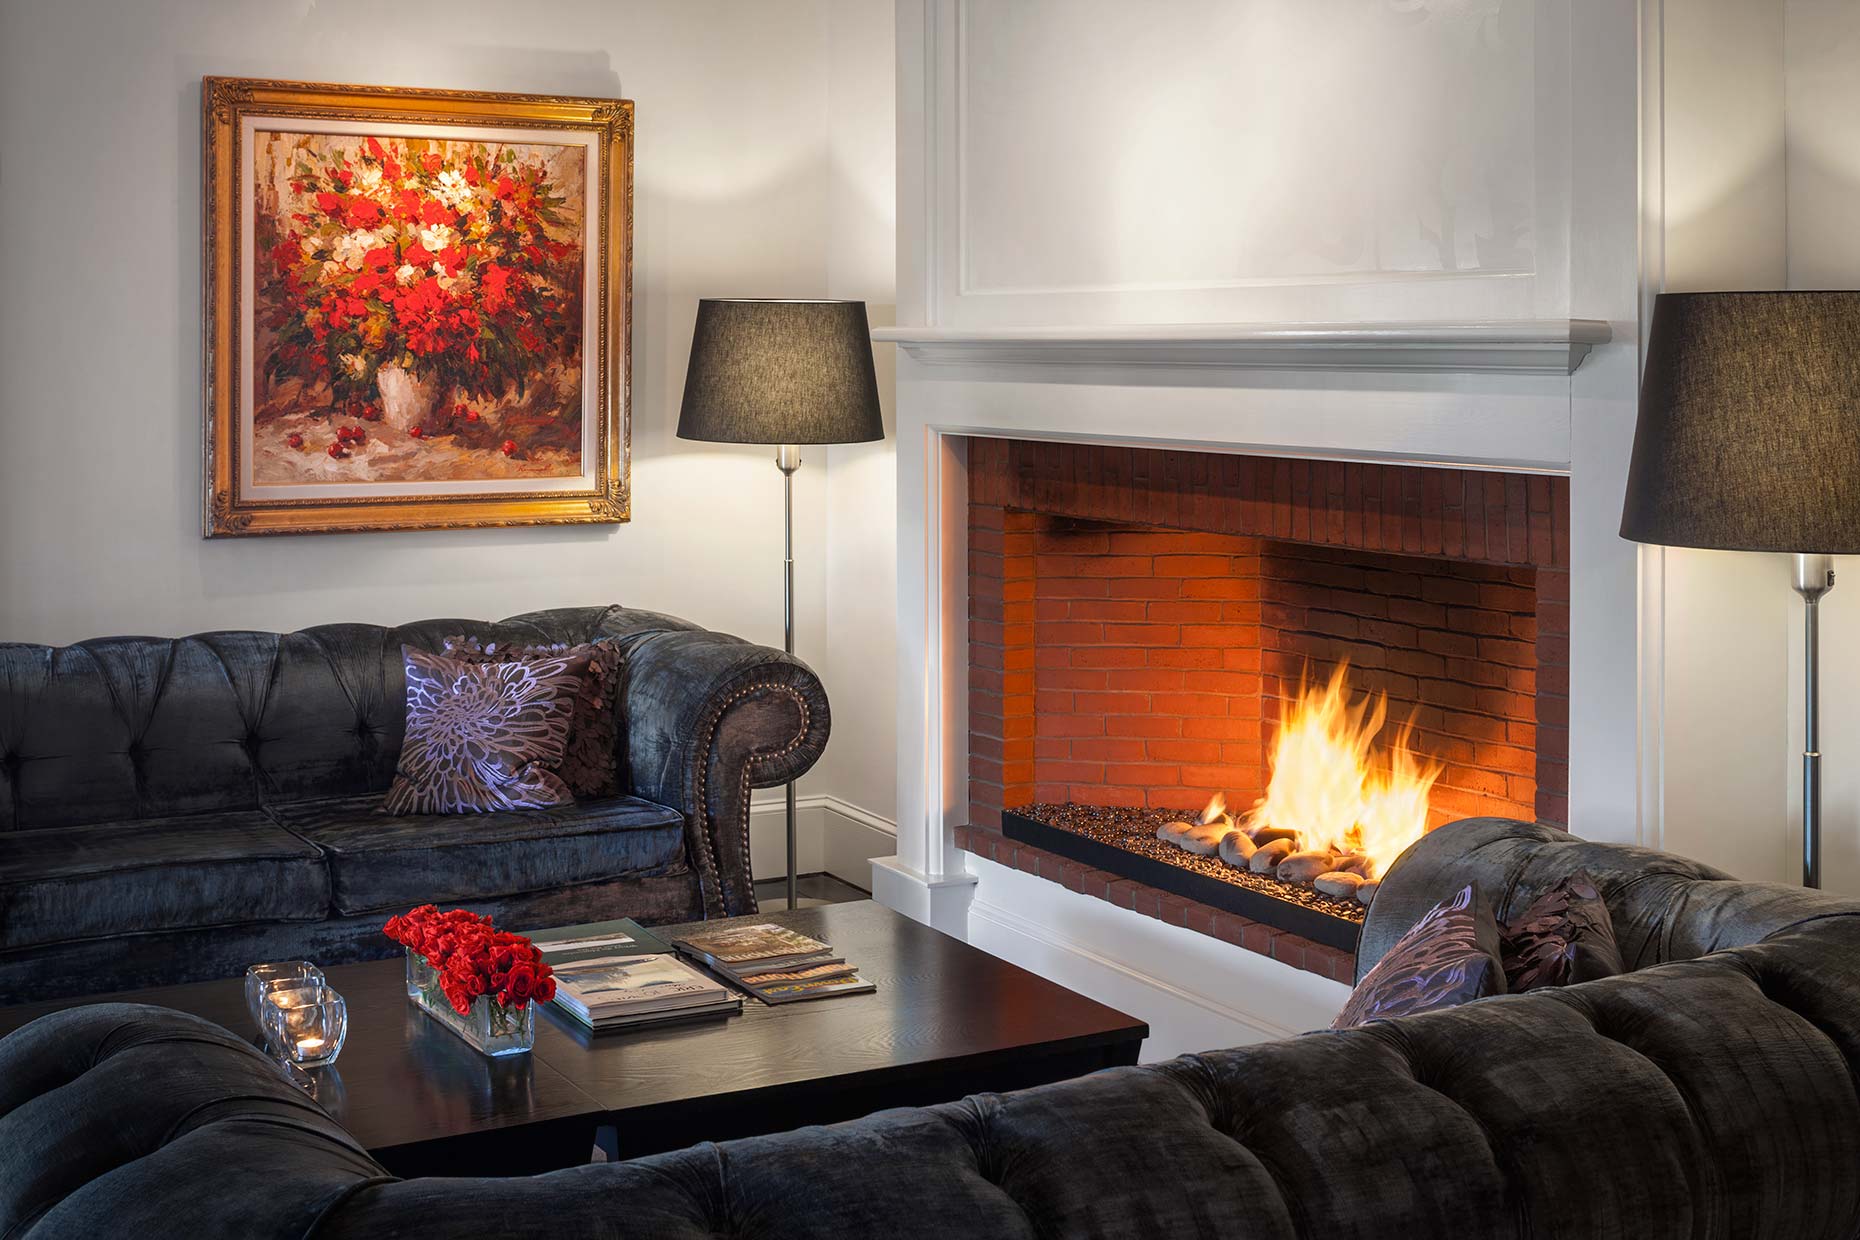 This Year, Consider a Romantic Winter Getaway in Maine